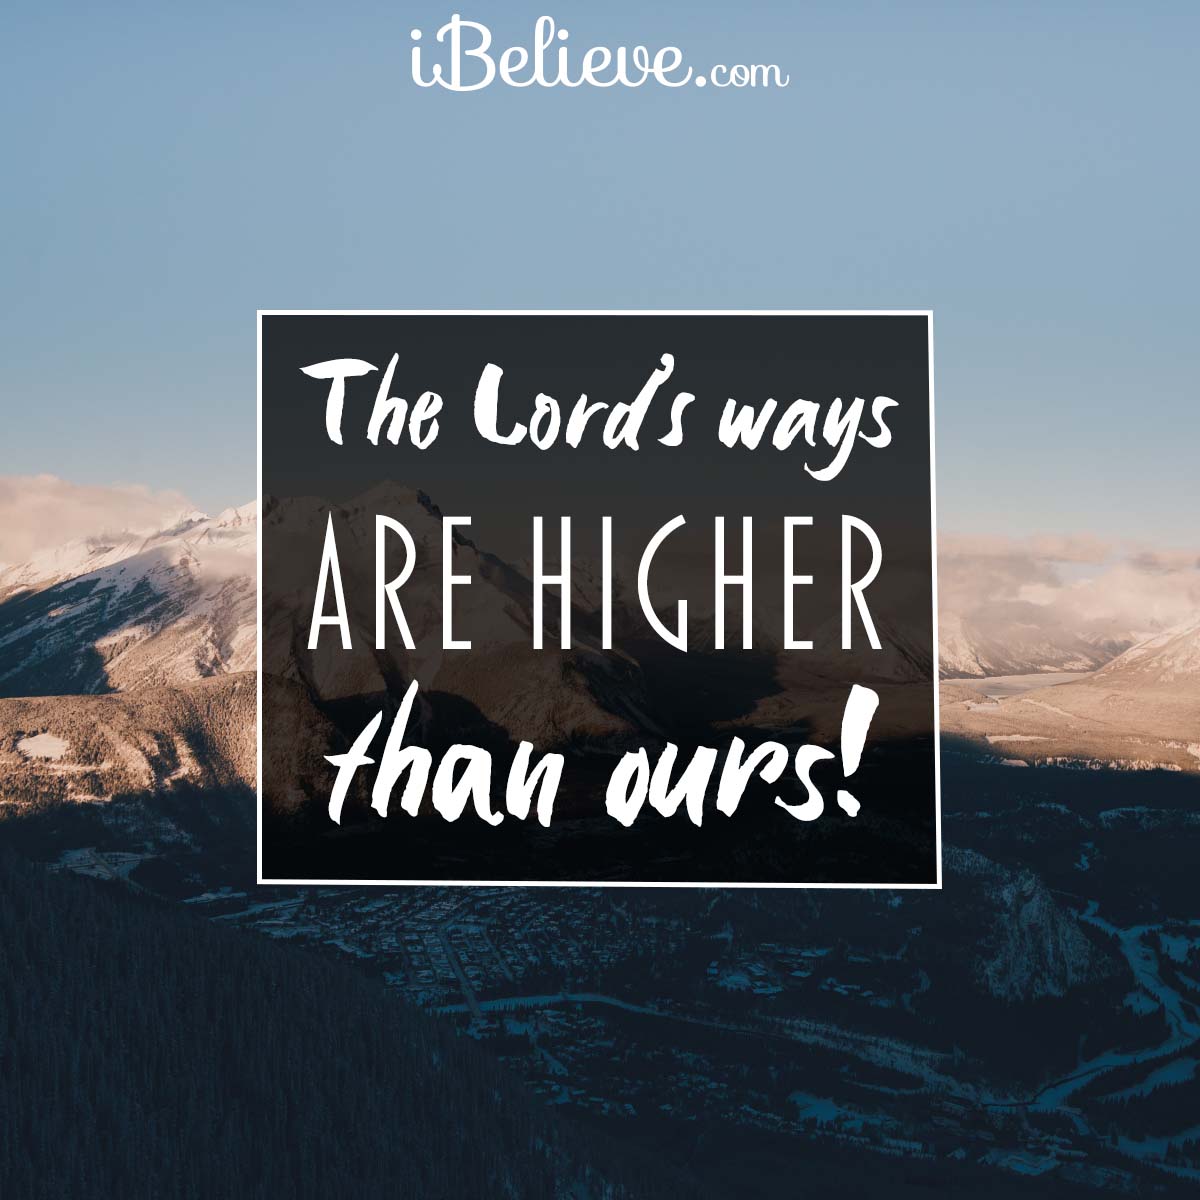 The Lords ways are higher than ours, inspirational image